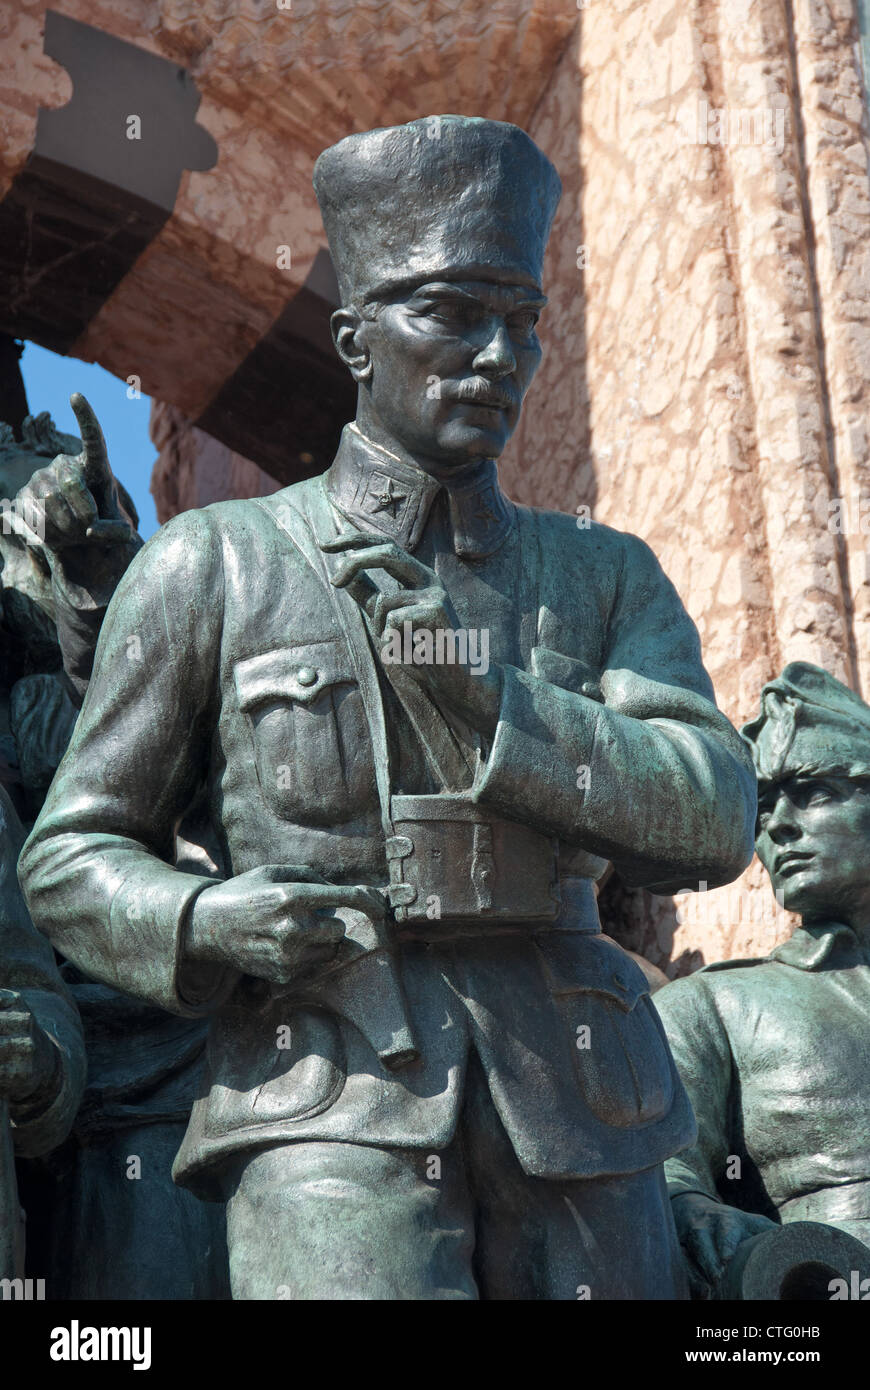 ISTANBUL, TURKEY. A statue of Ataturk as a soldier, part of the Ataturk monument on Taksim Square. 2012. Stock Photo